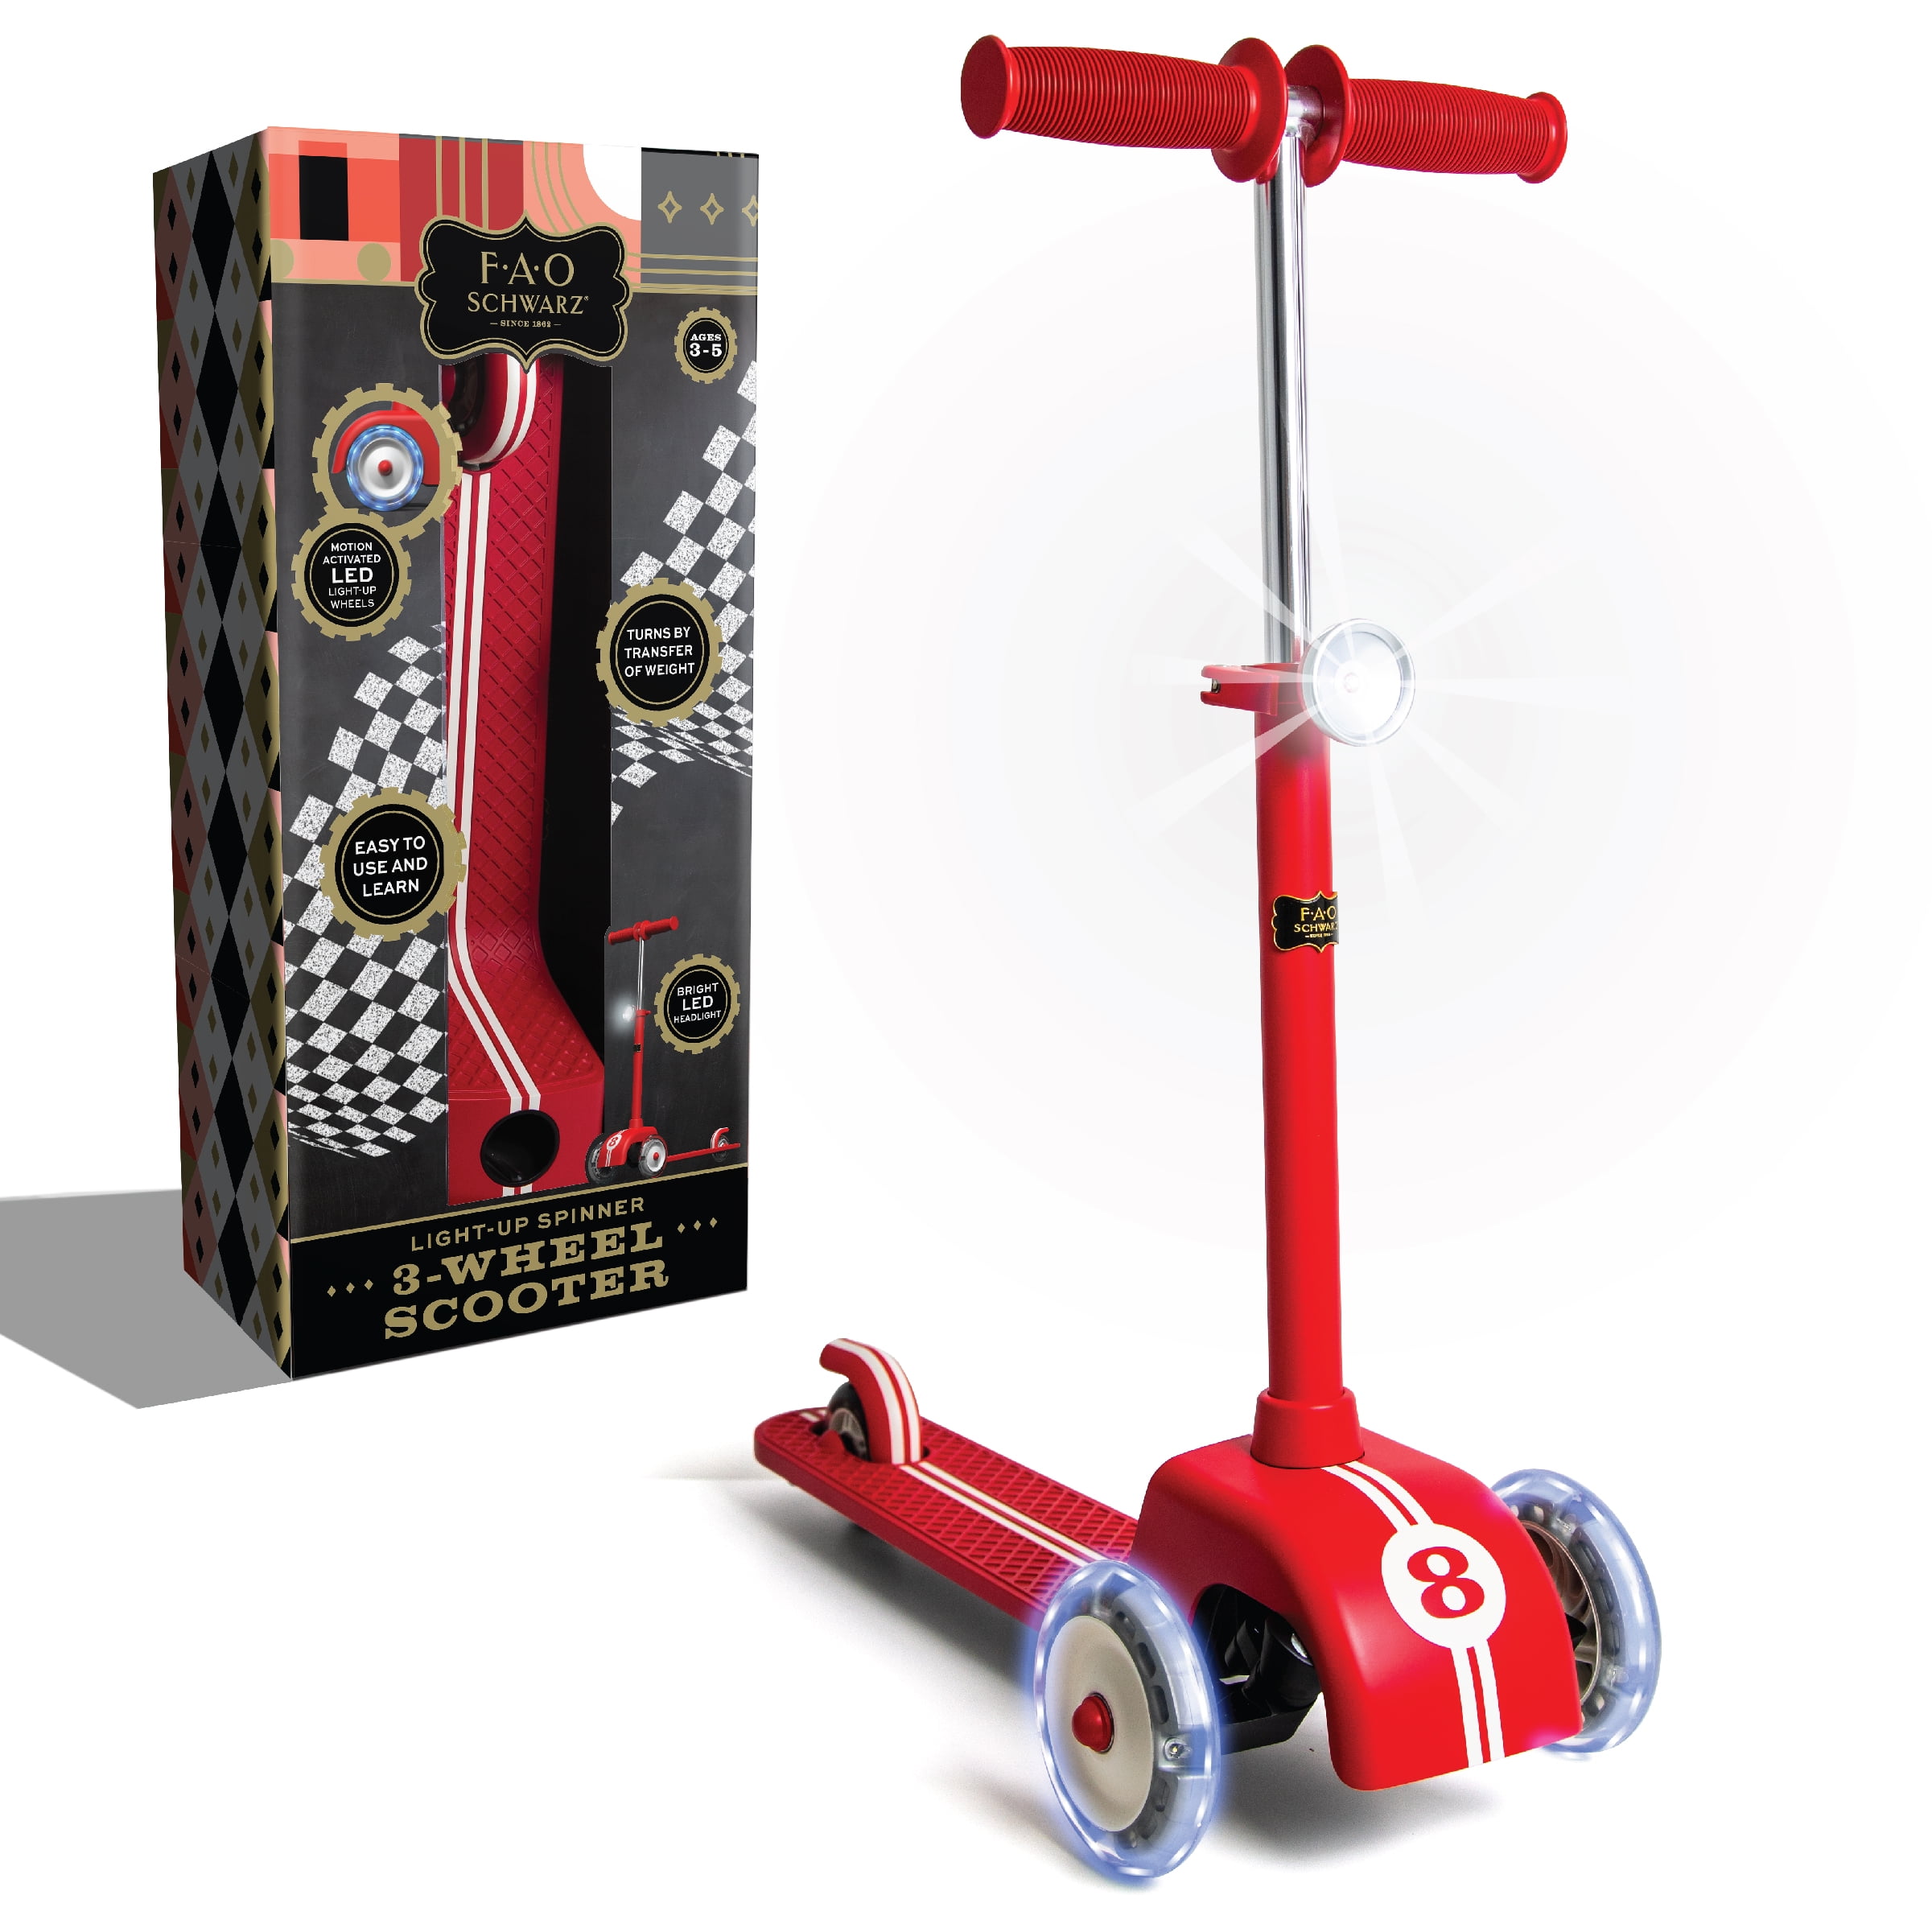 FAO Schwarz Kids LED Light-Up Spinner 3-Wheel Scooter Red White Striped  Kickstart Razor with Adjustable Height Fun Activity for Outdoor Day/Night  Play | Stuntscooter